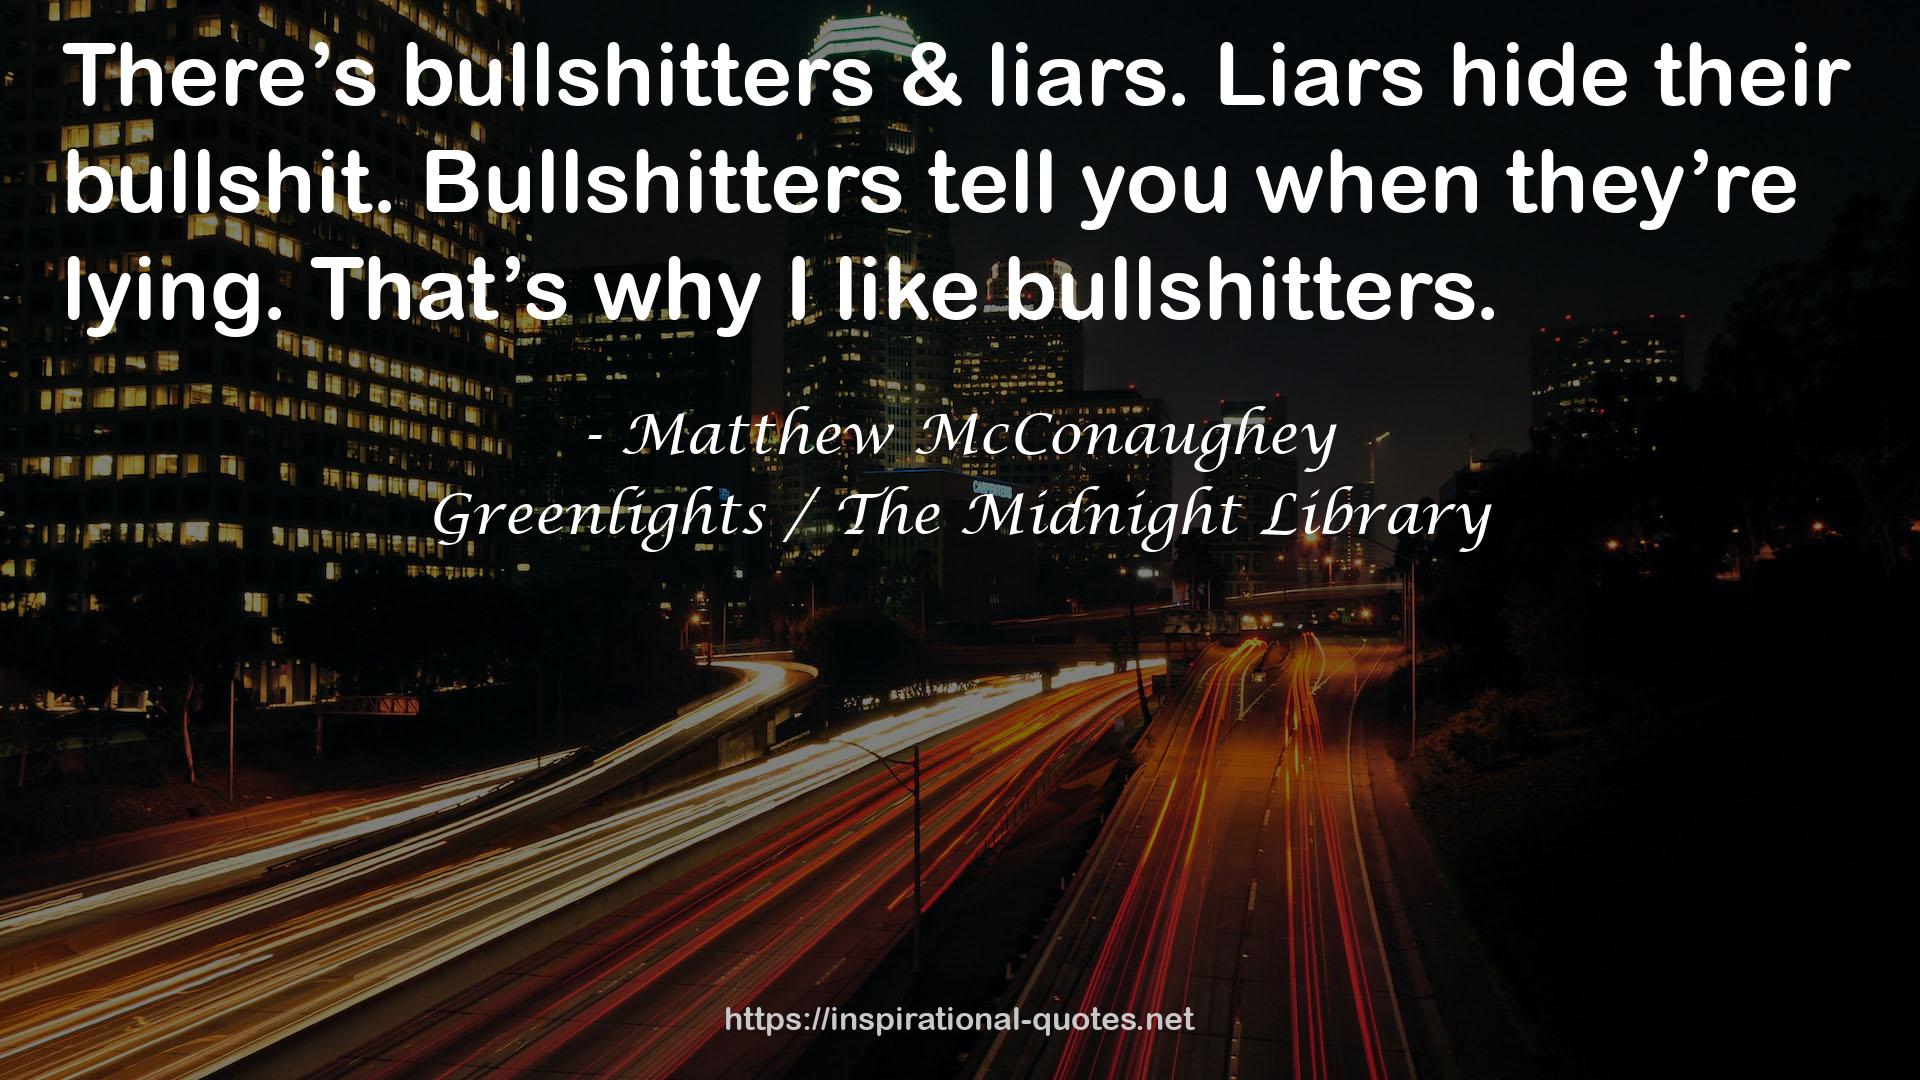 Greenlights / The Midnight Library QUOTES